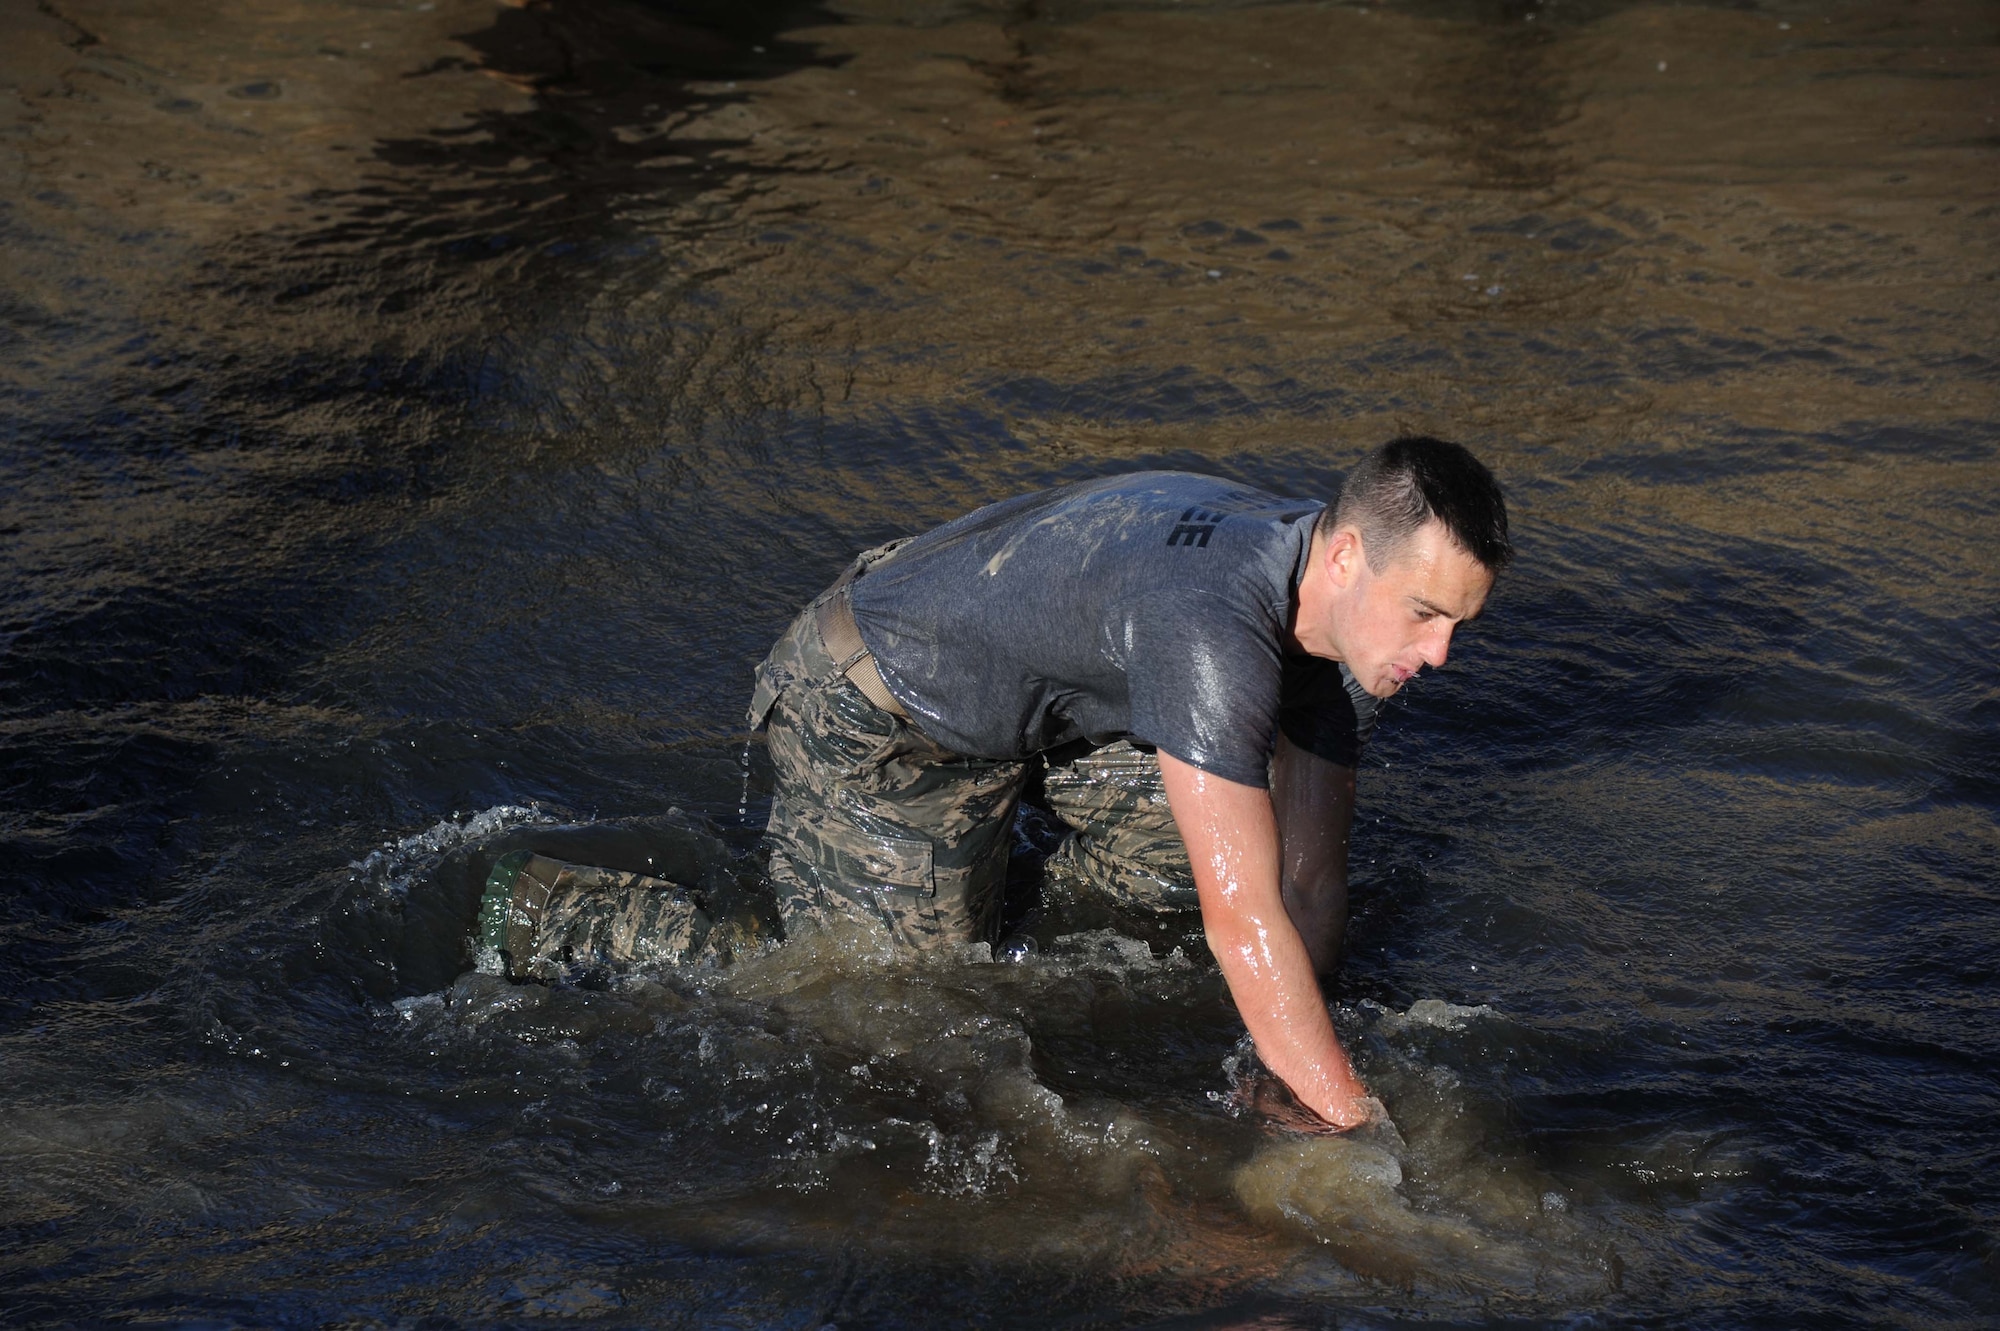 Airman Sean Cummins, 334th Training Squadron, pushes himself up after jumping into the water from a cement pillar during the combat controllers’ physical training session April 12, 2013, on Biloxi beach.  Combat controllers are ground troops who are embedded with special forces teams and provide close-air support for special forces units. While at Keesler, trainees learn how to run, swim, carry a rucksack and conduct air traffic control. These Airmen are prepared physically and mentally for the demands of the combat controller pipeline while earning air traffic control certification in just 15 weeks.  (U.S. Air Force photo by Kemberly Groue)